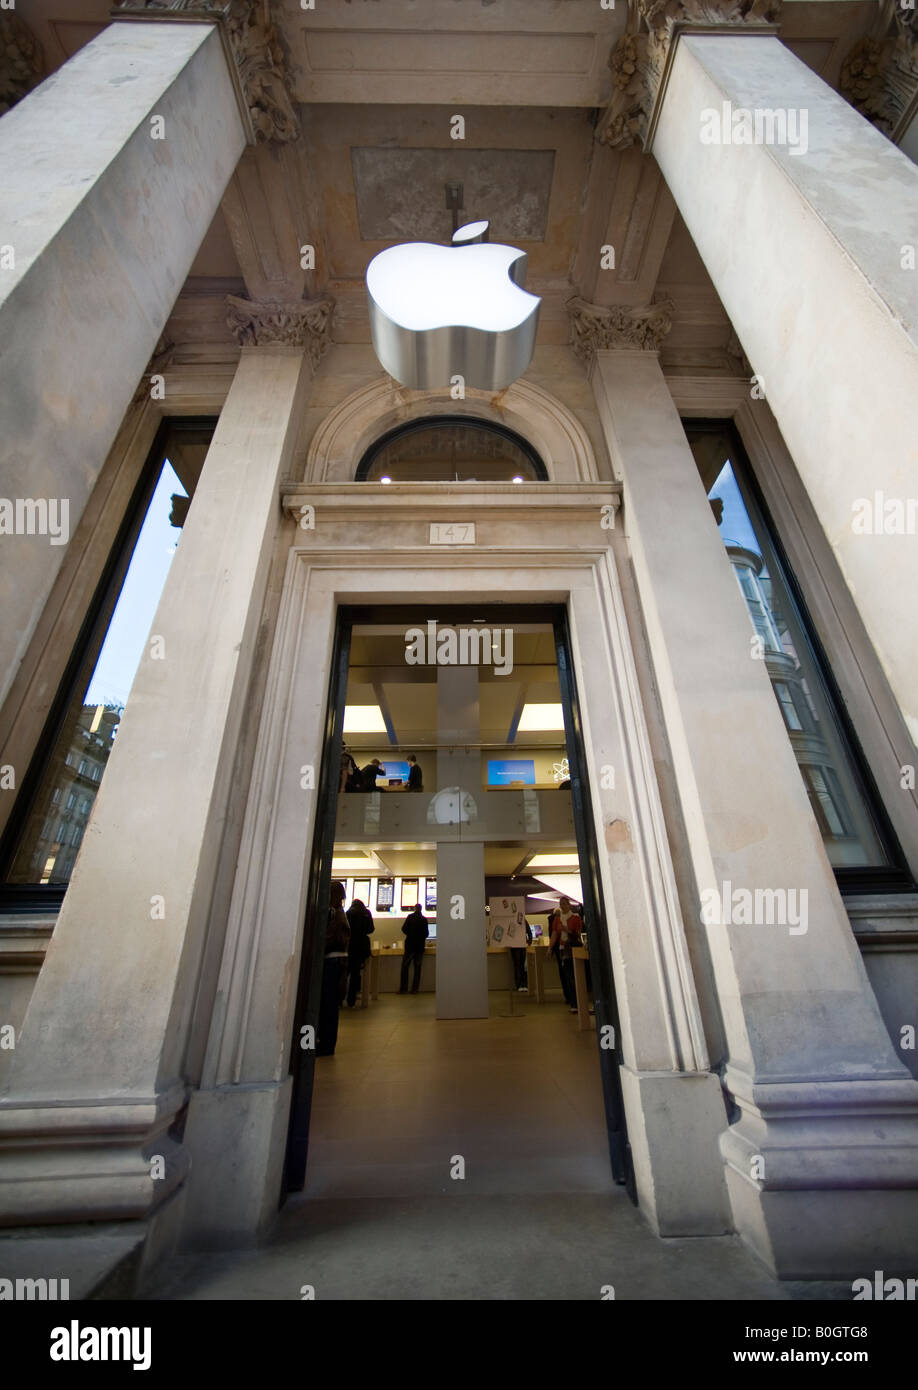 Entrance to the Apple store in Glasgow, Scotland Stock Photo